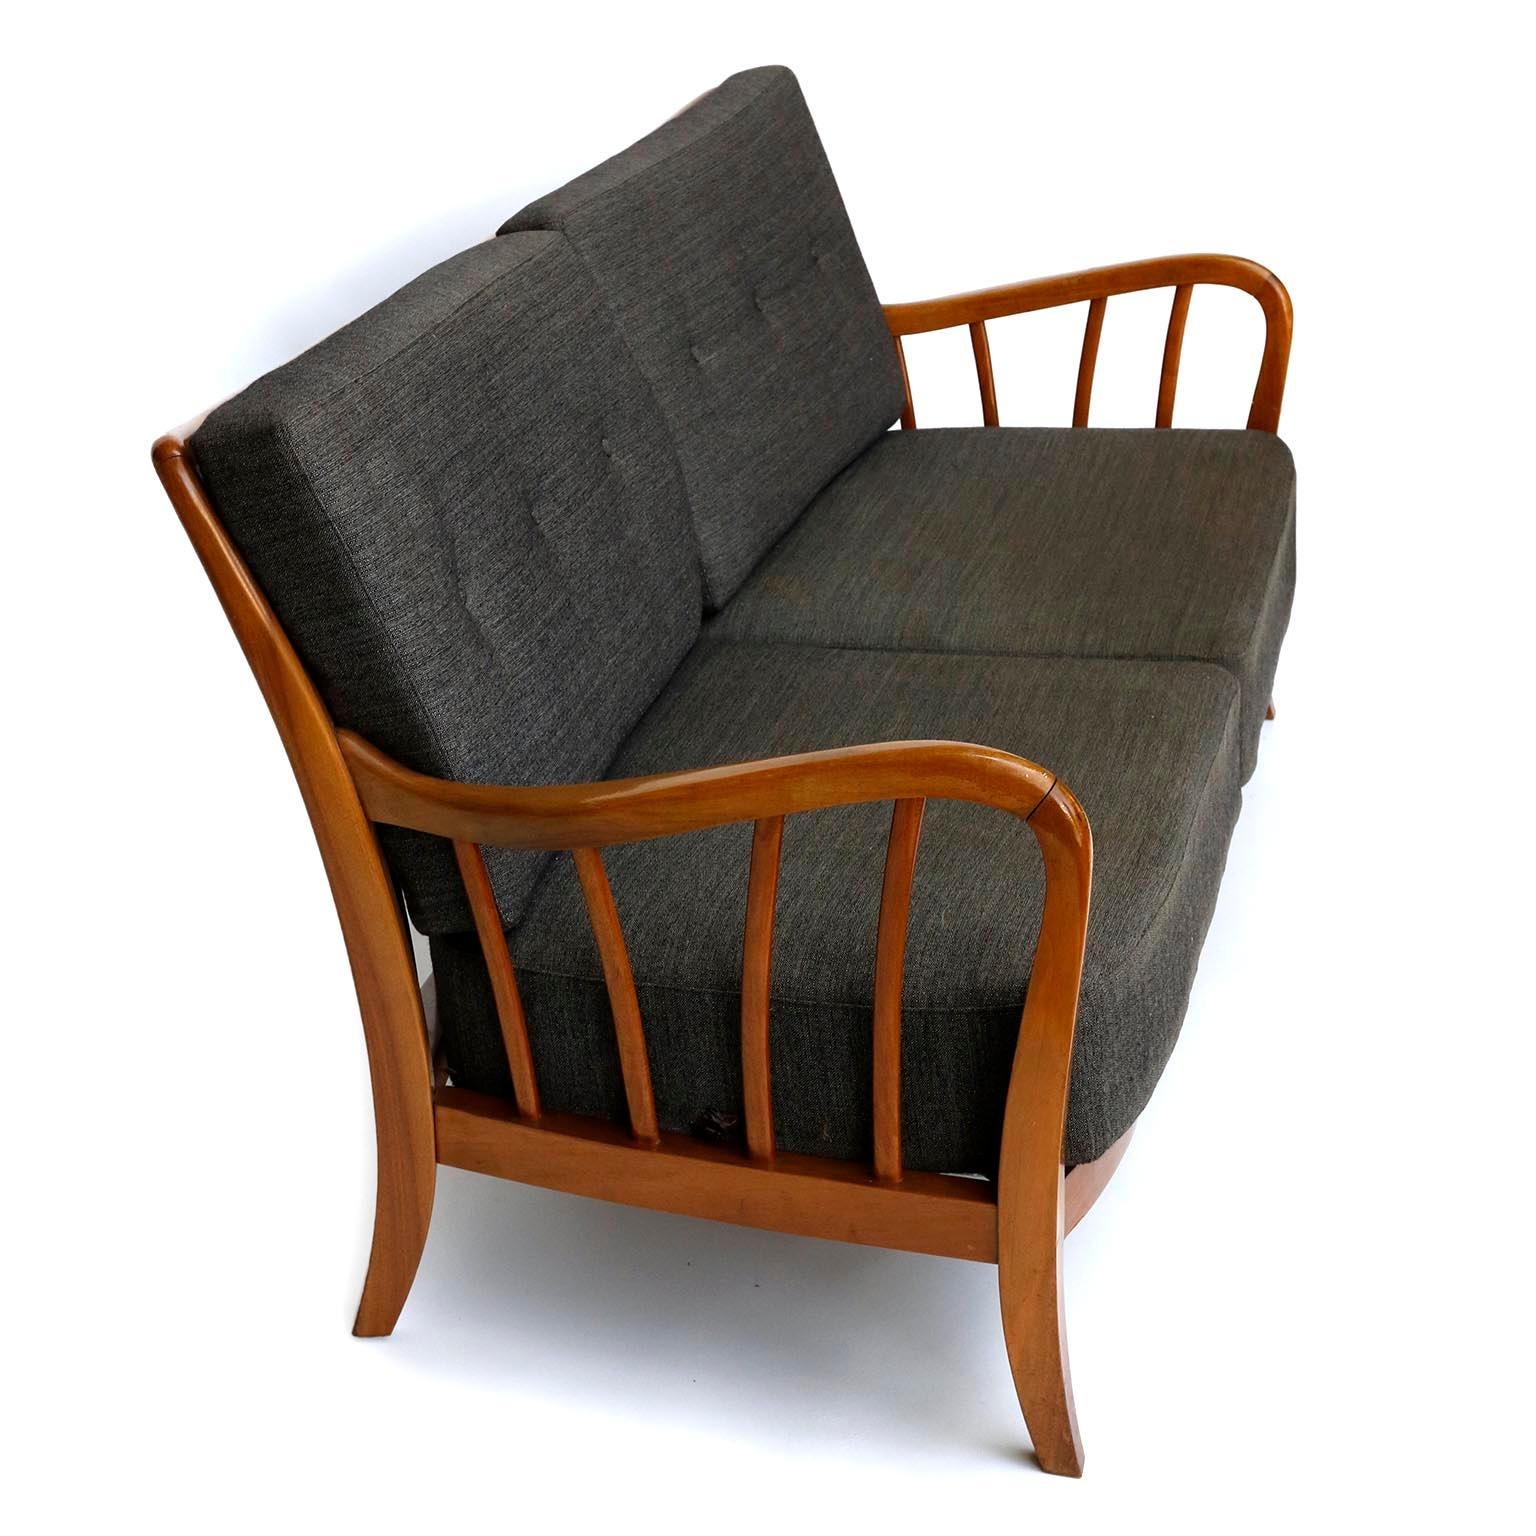 Seette Bench Seat Attributed to Josef Frank, Walnut Wood, Thonet, 1940 2